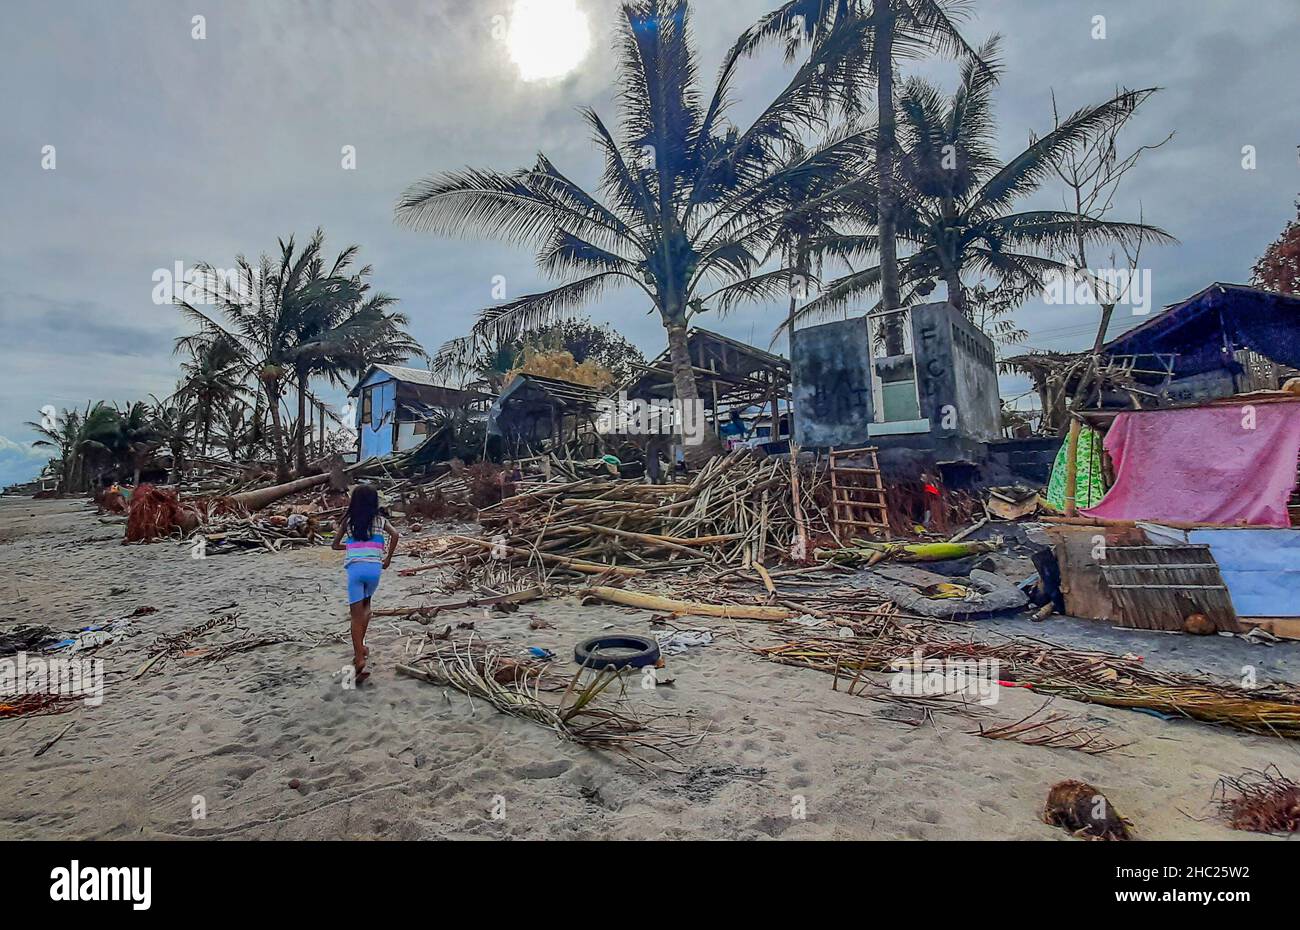 (211222) -- LEYTE PROVINCE, Dec. 22, 2021 (Xinhua) -- Photo shows a fishing community damaged by Typhoon Rai along a shoreline in Leyte Province, the Philippines, Dec. 22, 2021.  The National Disaster Risk Reduction and Management Council (NDRRMC) reported that 156 people died from the typhoon, while the Philippine National Police reported at least 375 deaths. Many more are missing or injured.   On Thursday afternoon, Typhoon Rai first swept across Siargao Island, off the eastern coast on Mindanao island in the southern Philippines. It lashed the Southeast Asian country for three days, causing Stock Photo